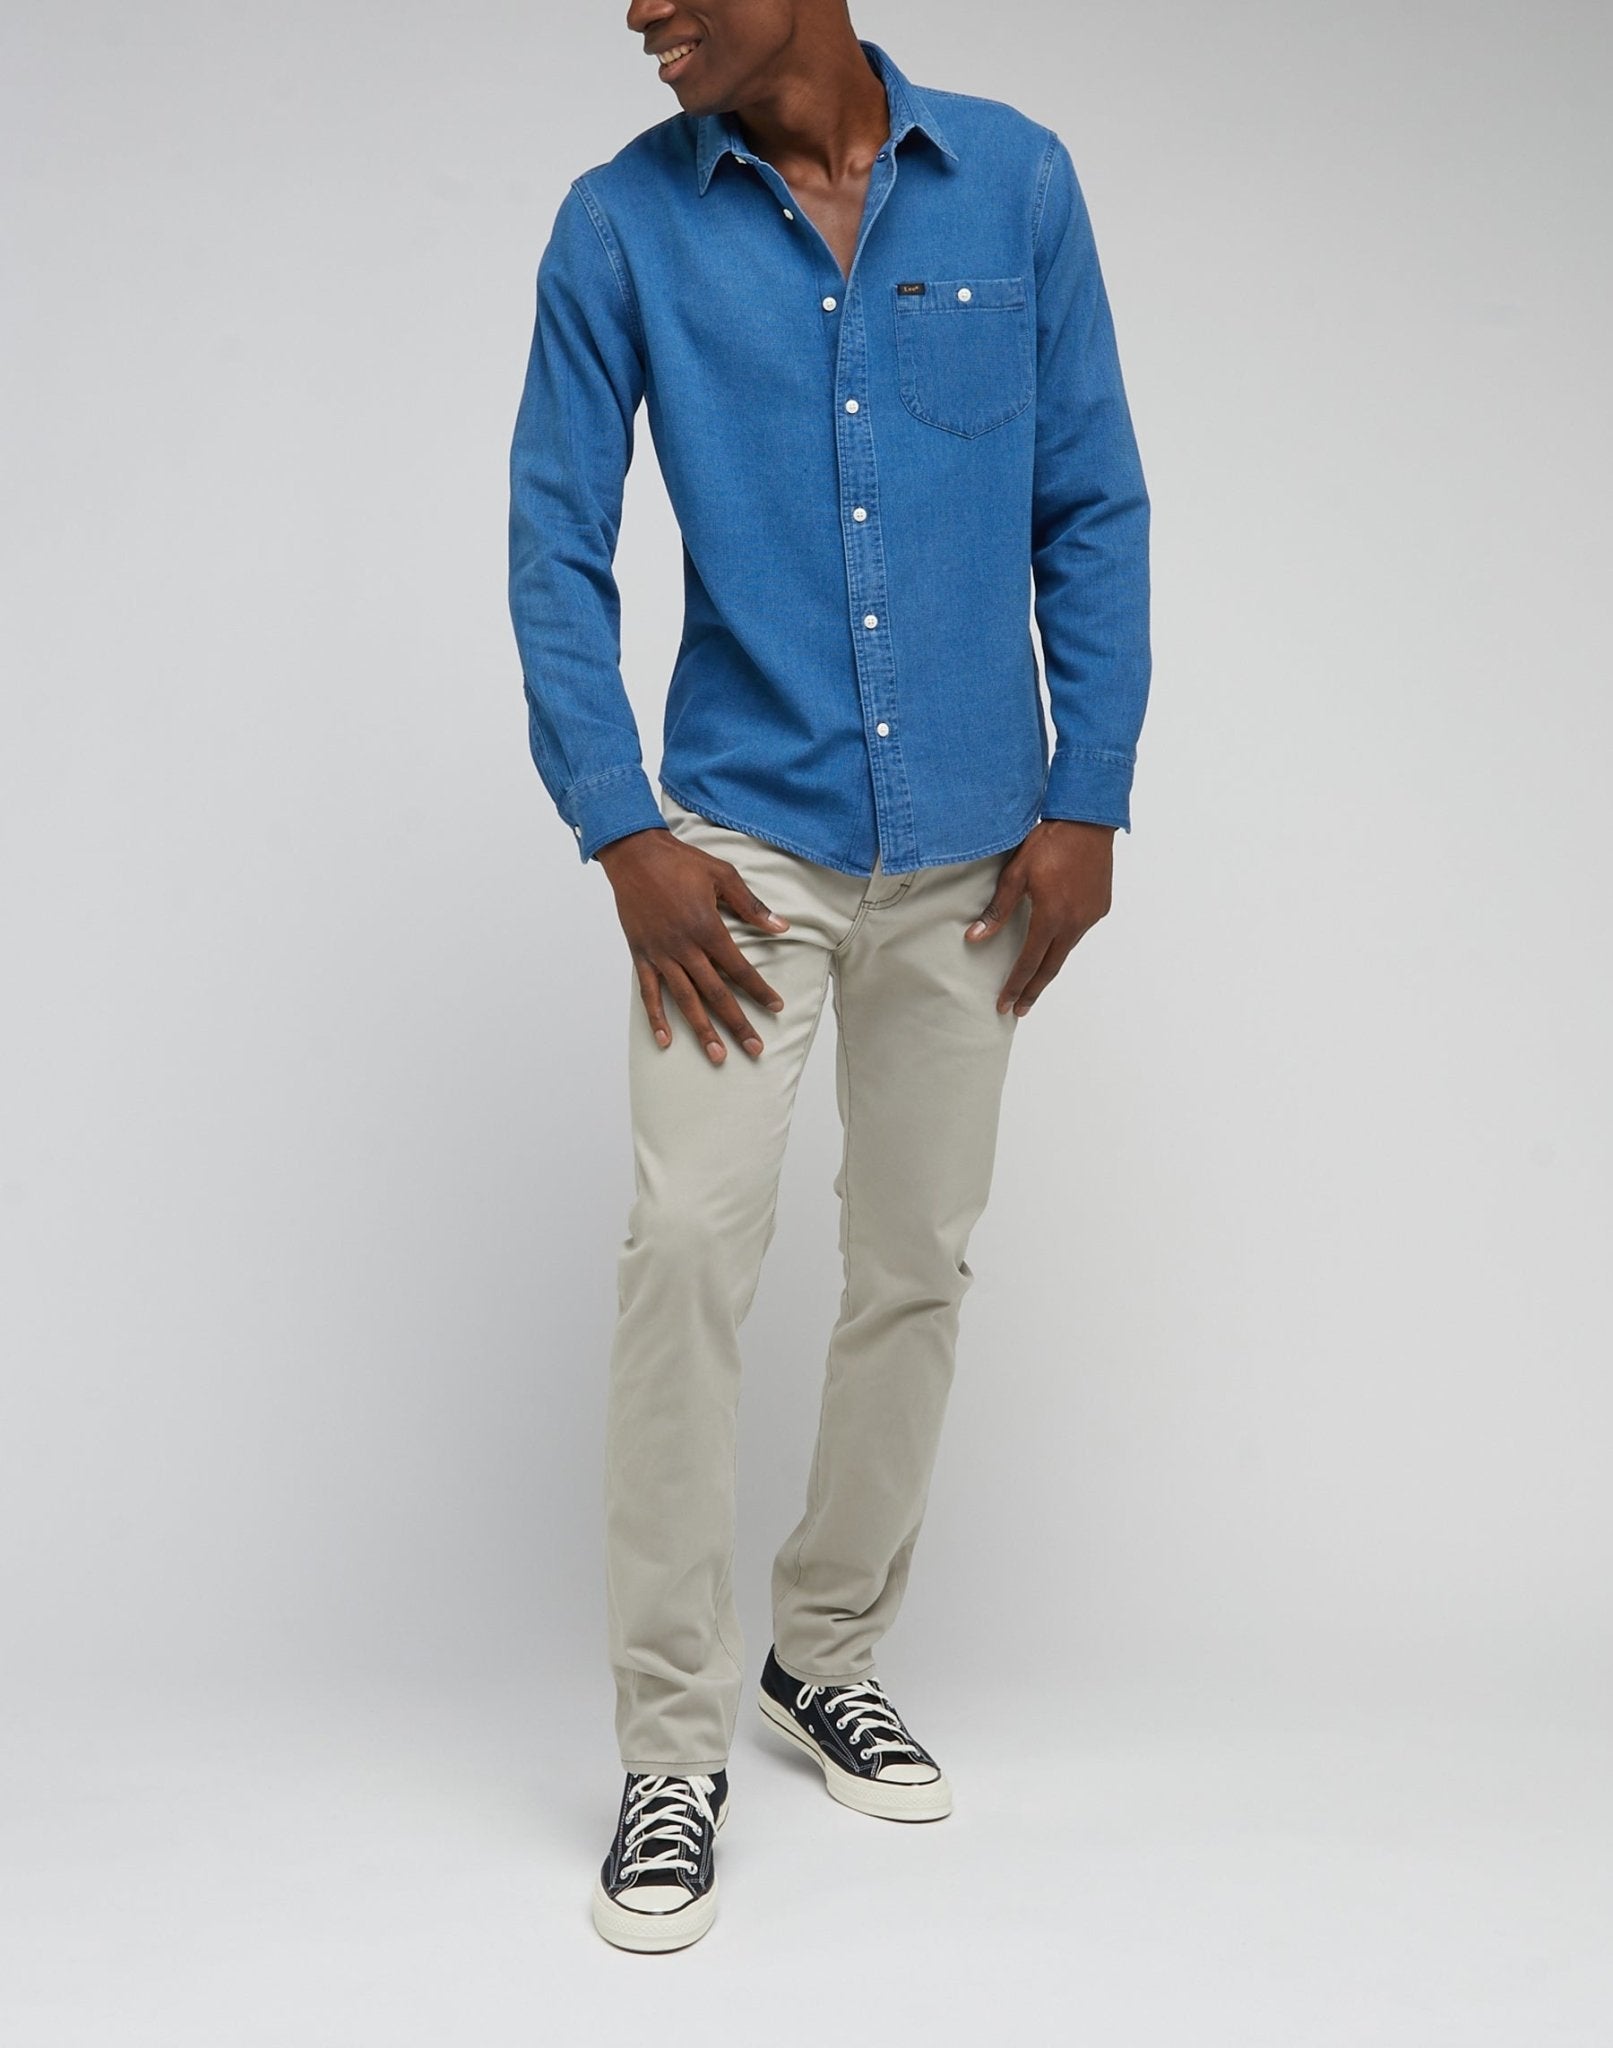 Riveted Shirt in Anthem Blue